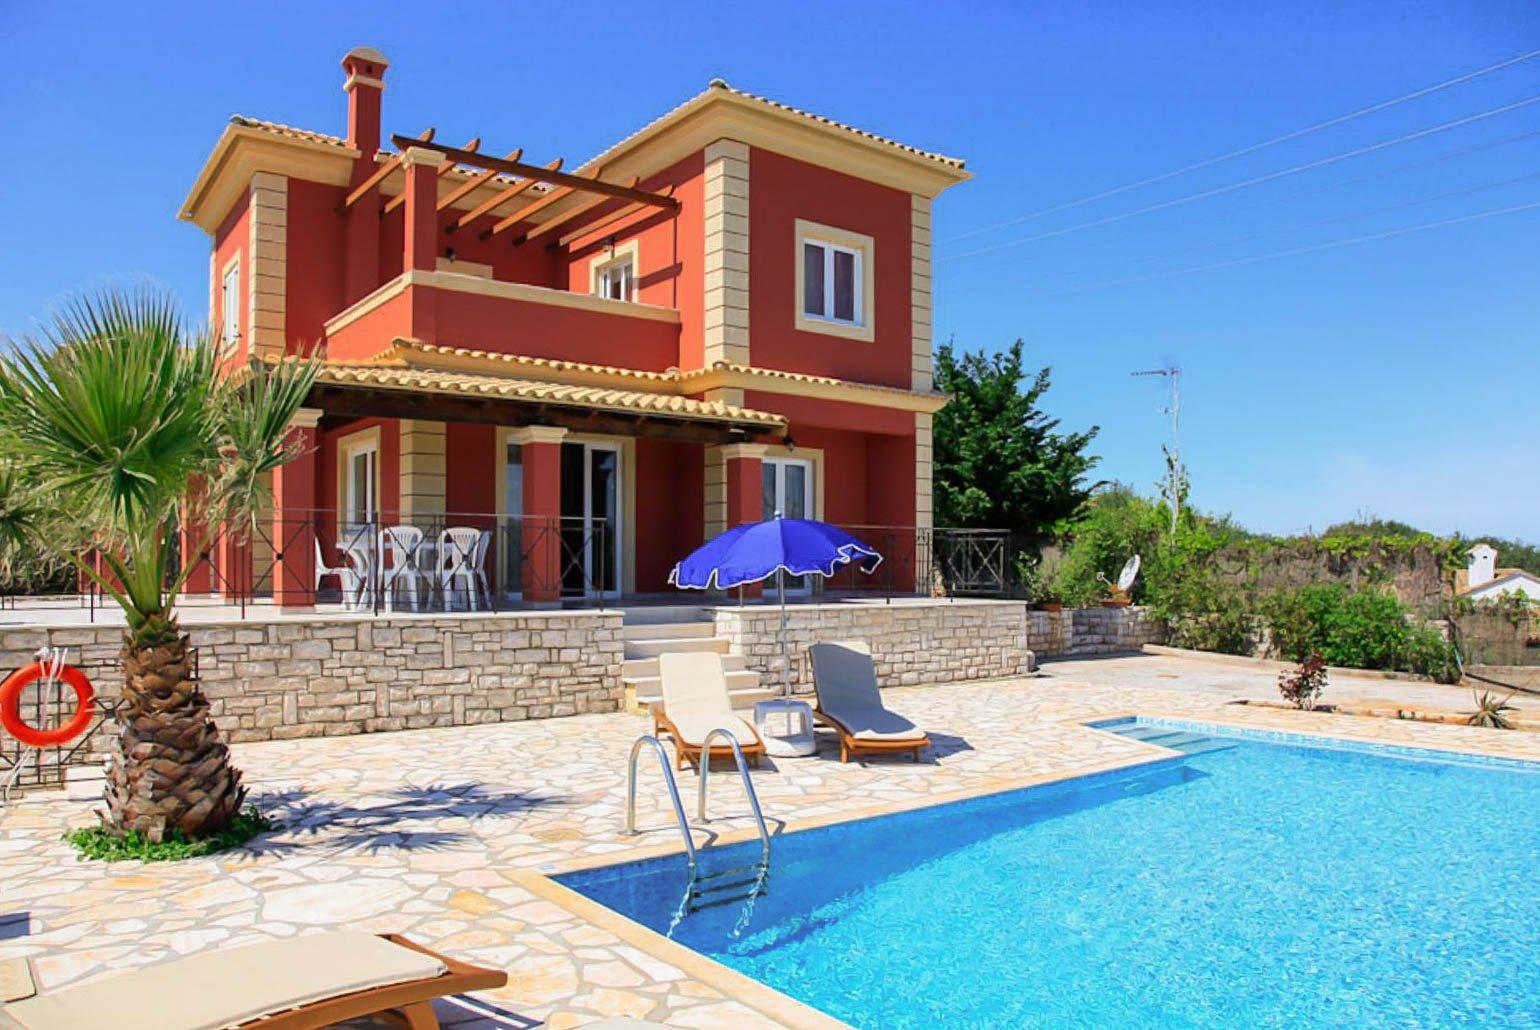 ,Private pool with terrace area and views